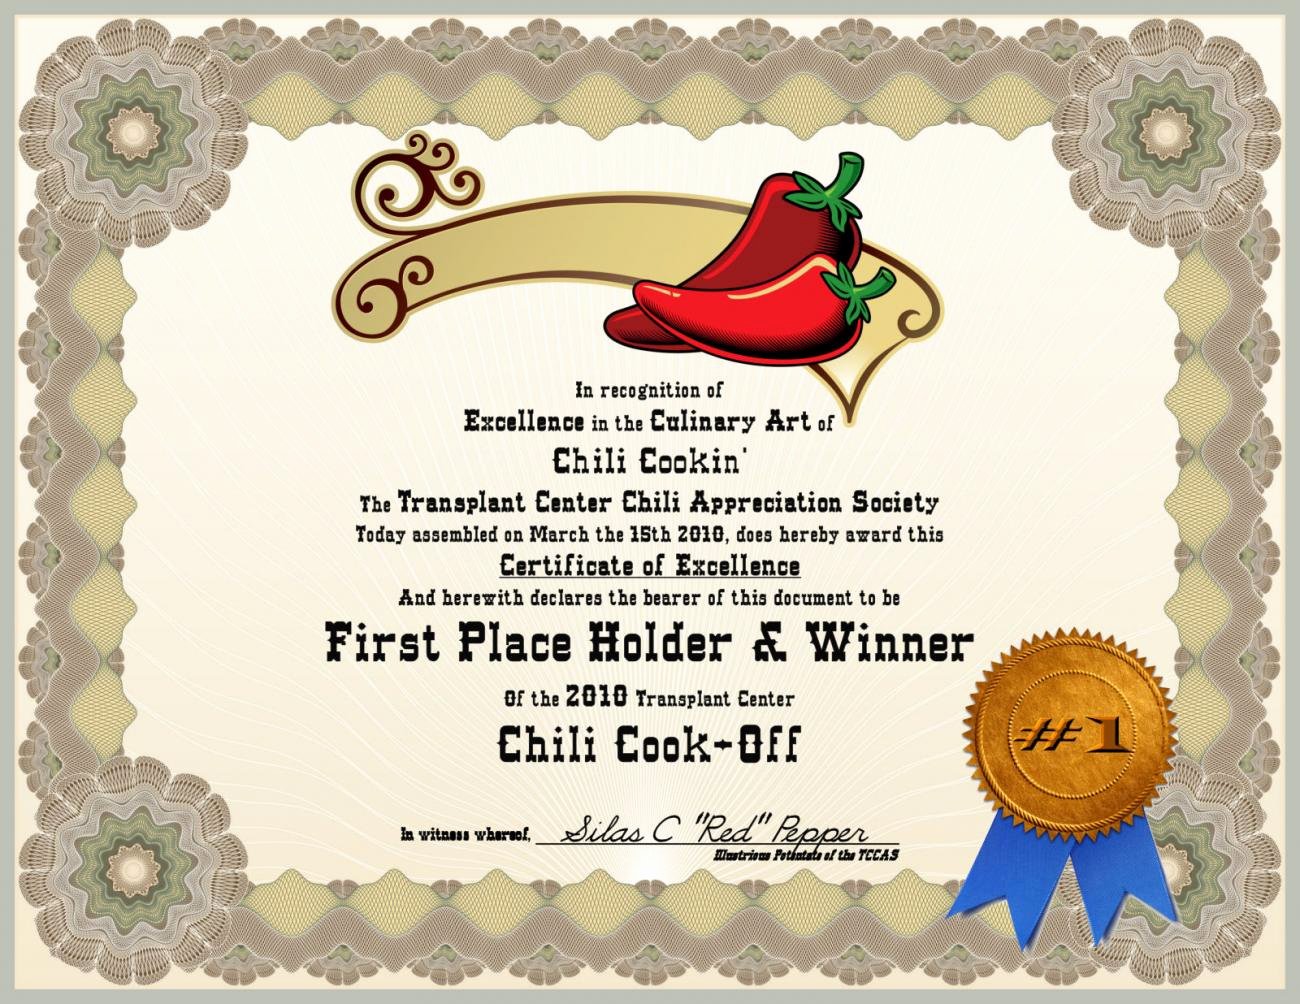 Chili Cook Off Award Certificate Template Elegant Chili Cook F Certificate by Captainjack1 2d Illustration